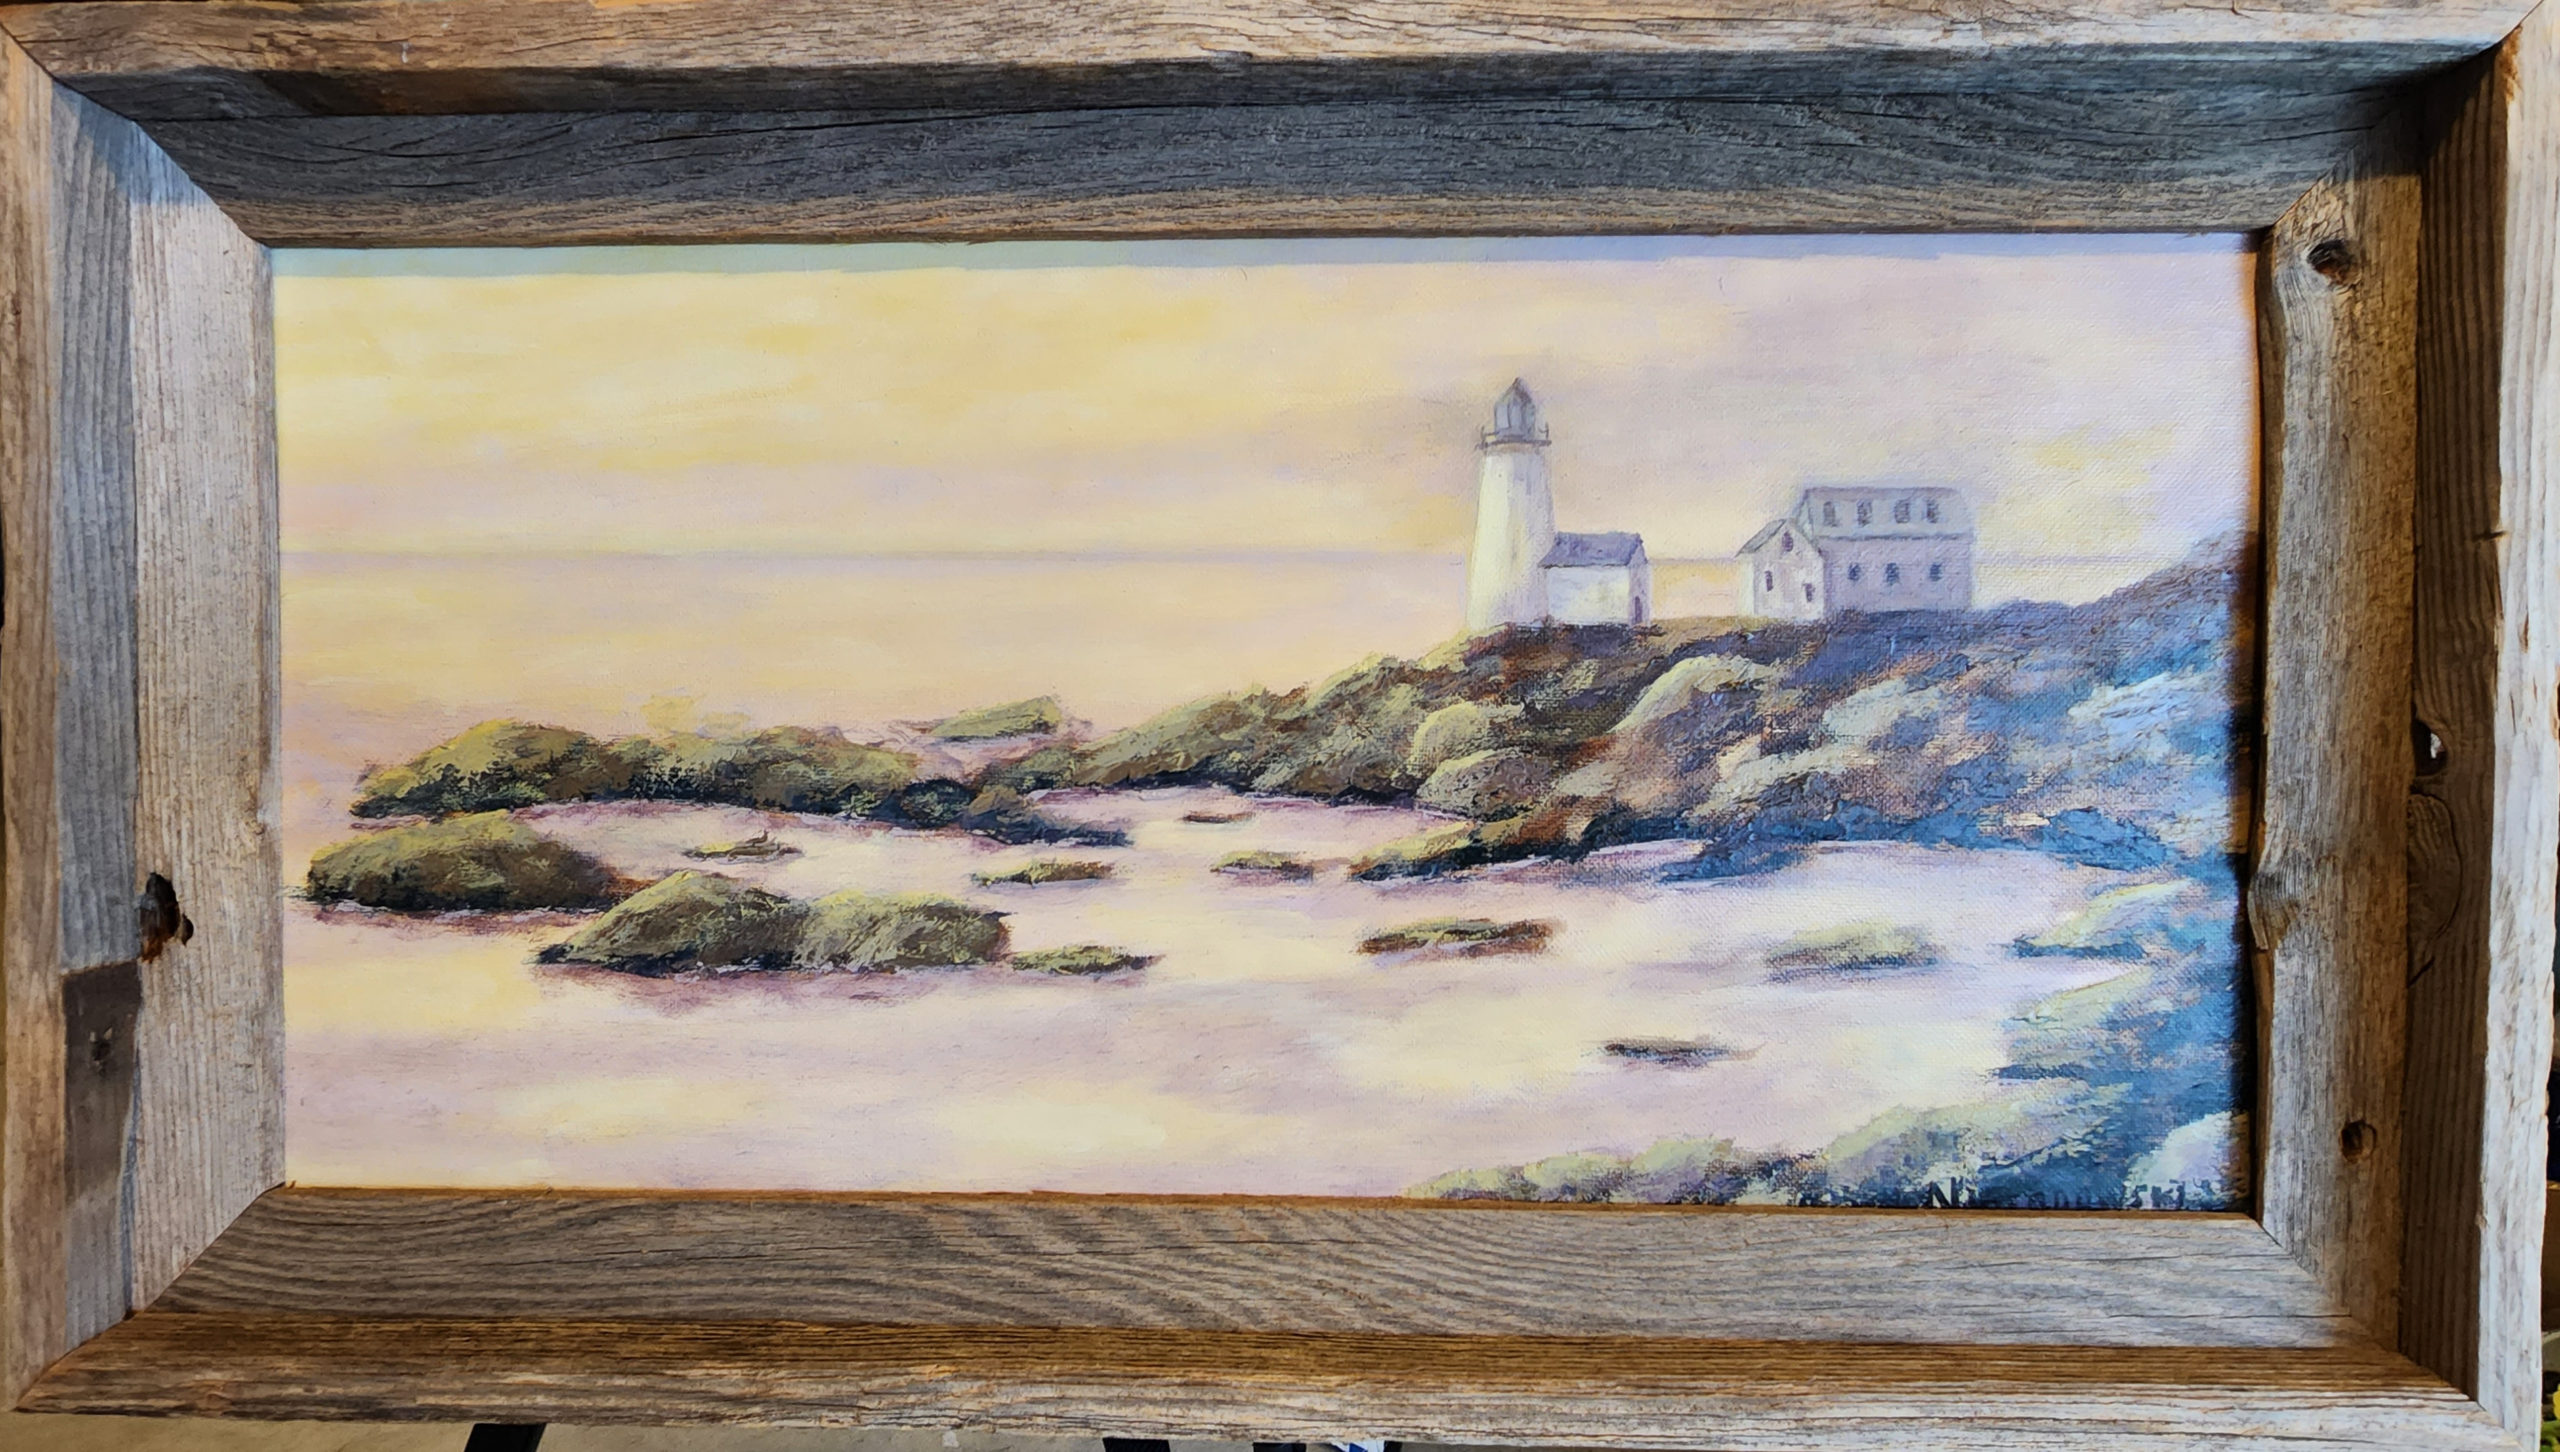 A painting by Bill Nieranowski entitled, "Life on the Rocks," featuring a lighthouse along a rocky coastline in soft light